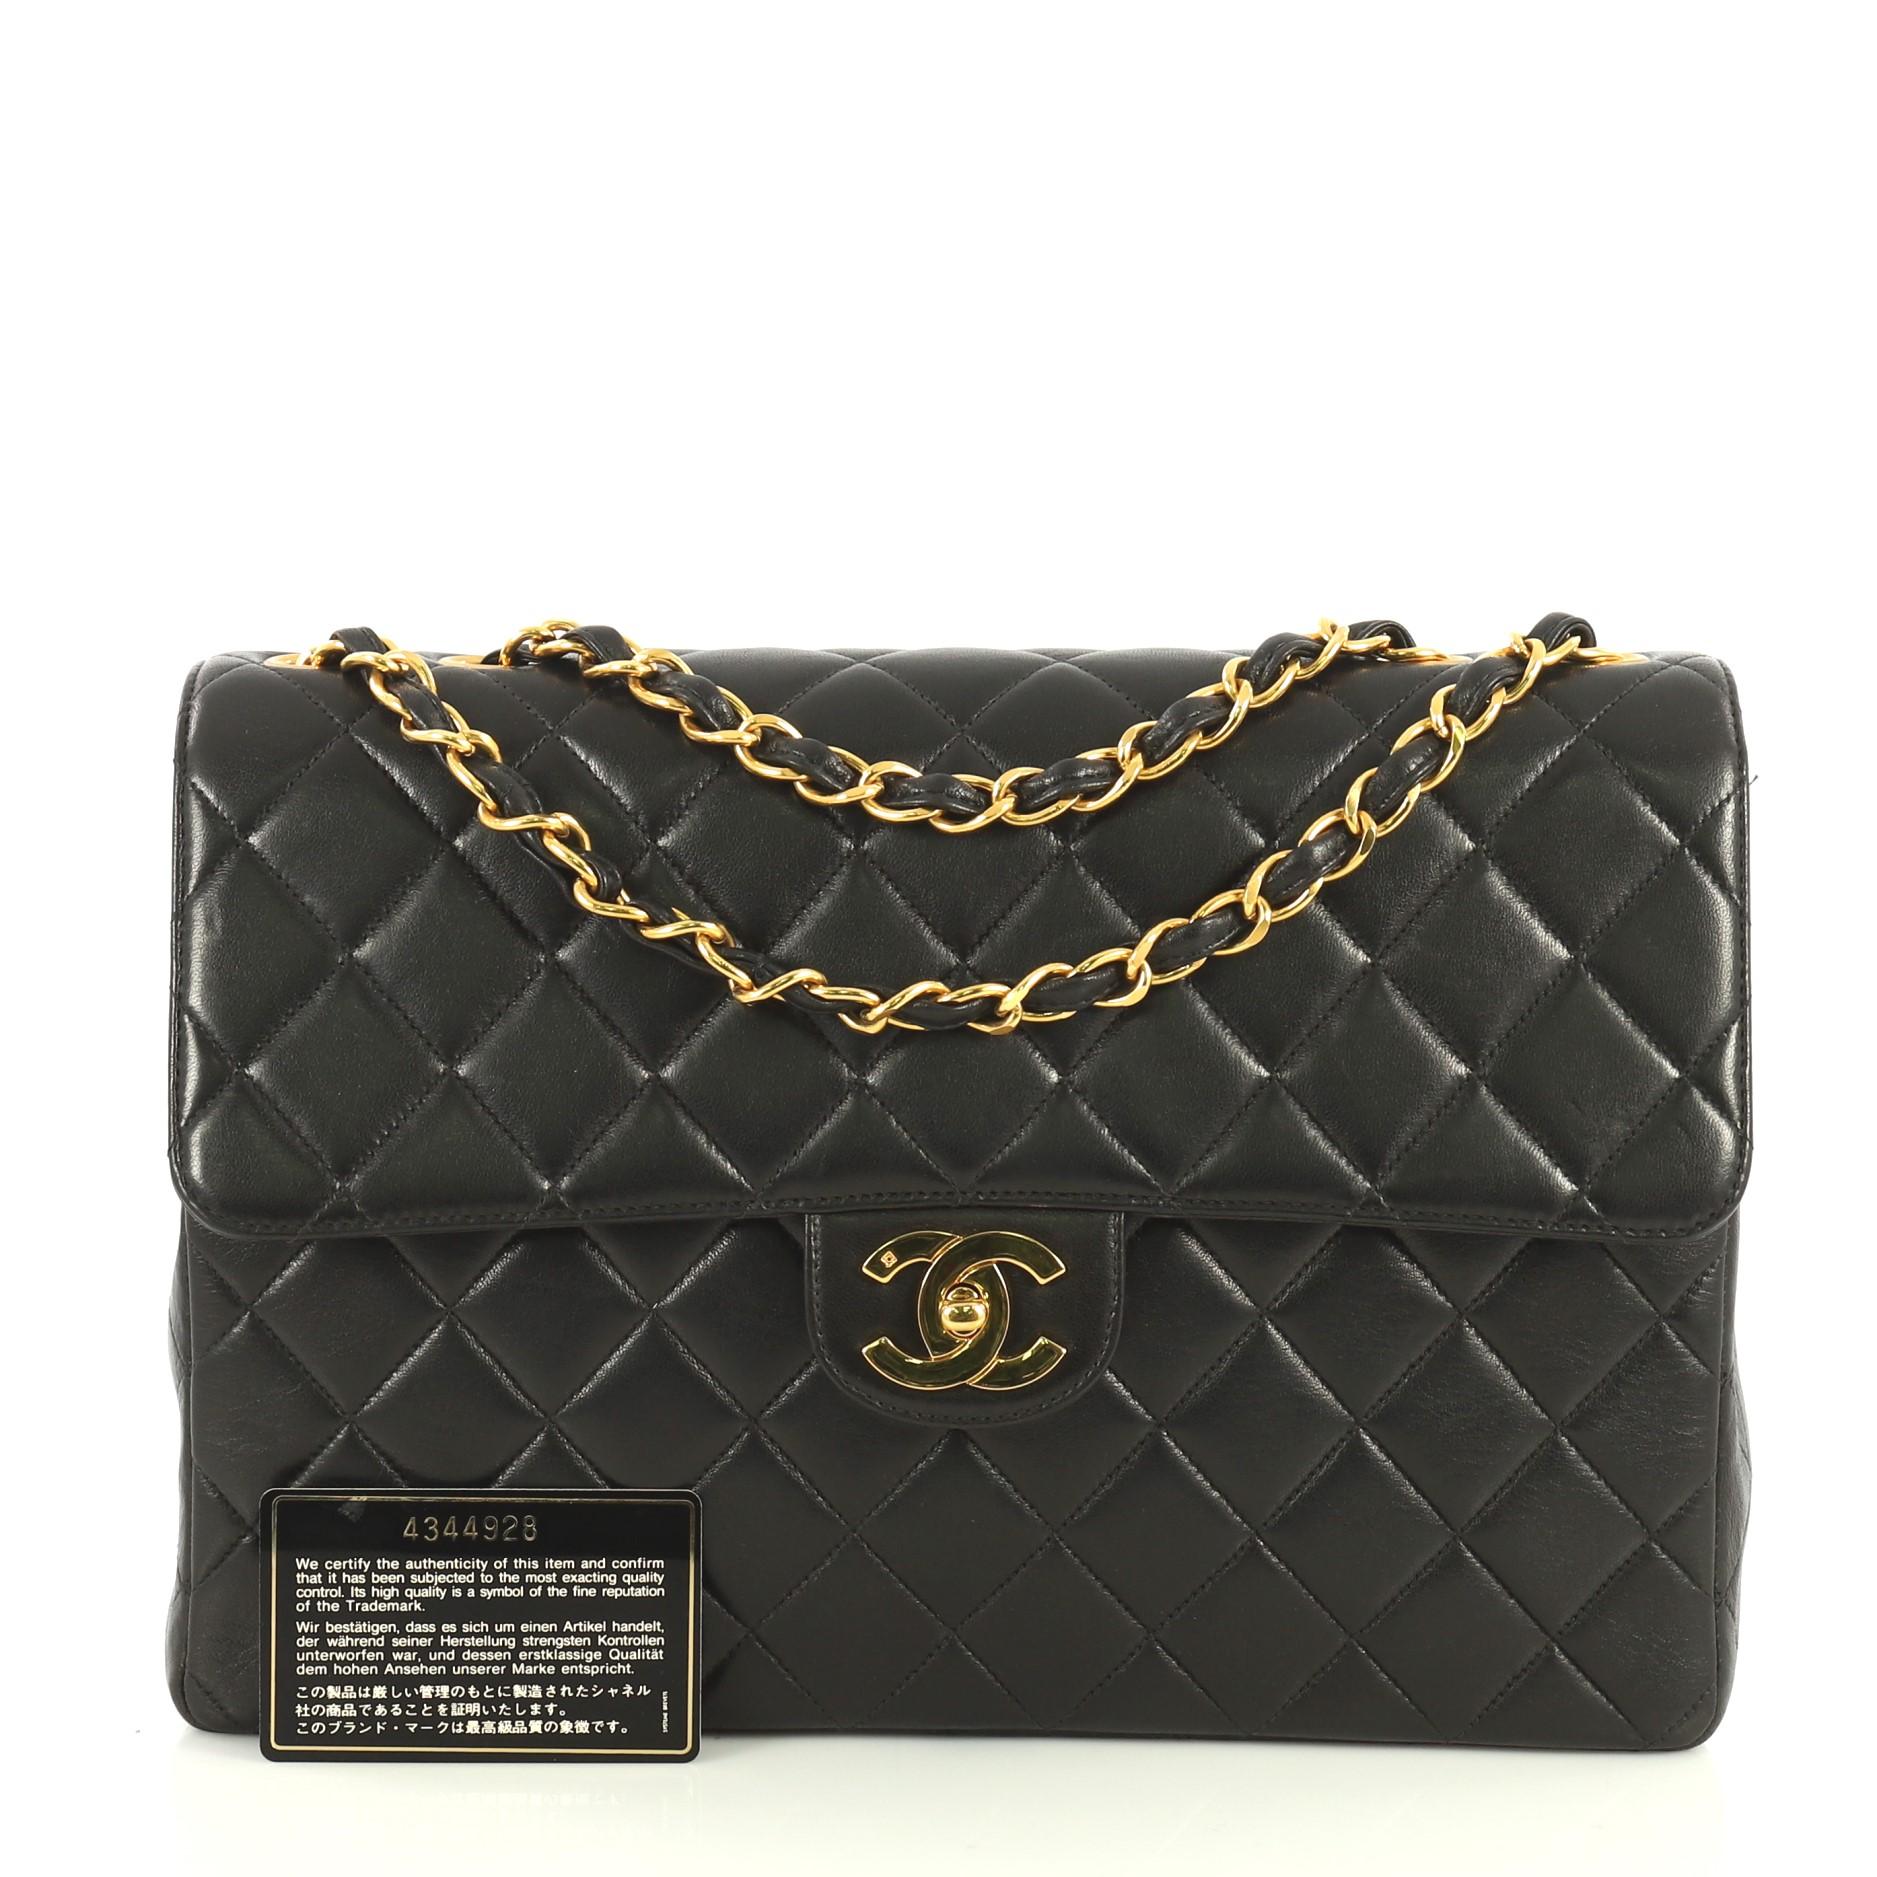 This Chanel Vintage Classic Single Flap Bag Quilted Lambskin Jumbo, crafted in black quilted lambskin, features woven-in leather chain link strap, exterior back slip pocket, and gold-tone hardware. Its CC turn-lock closure opens to a black leather